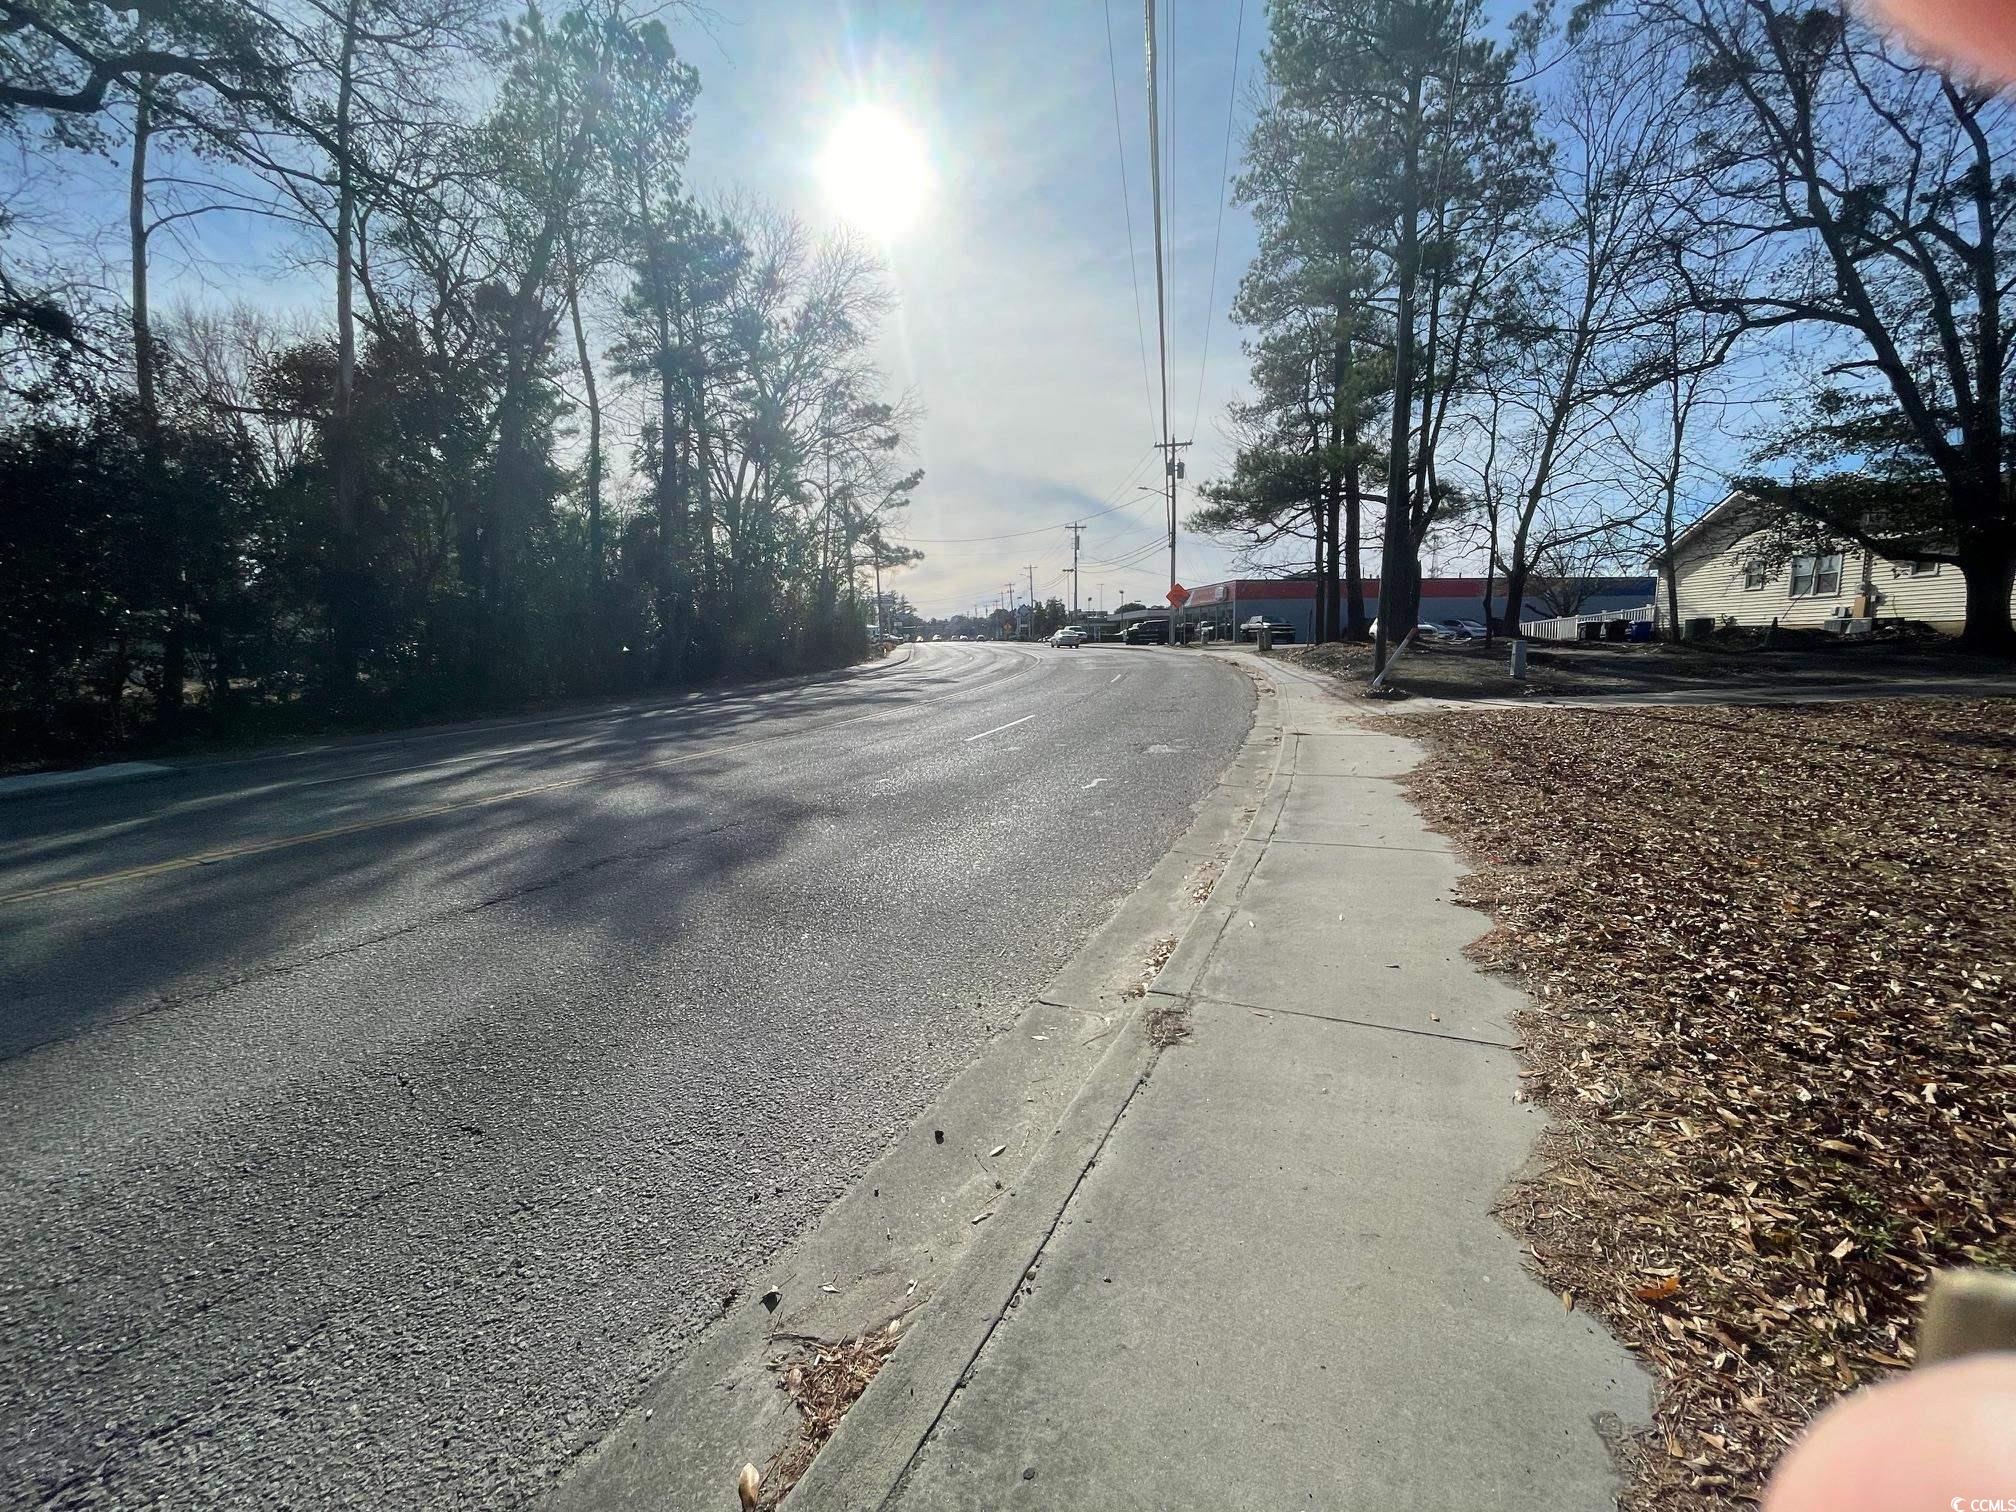 lot available on 16th ave between hwy 501 and elm street.. lot is approximately .74 acre. currently zoned residential but horry county zoning dept states may be rezoned to neighborhood commercial, located right beside the coastal shopping center.